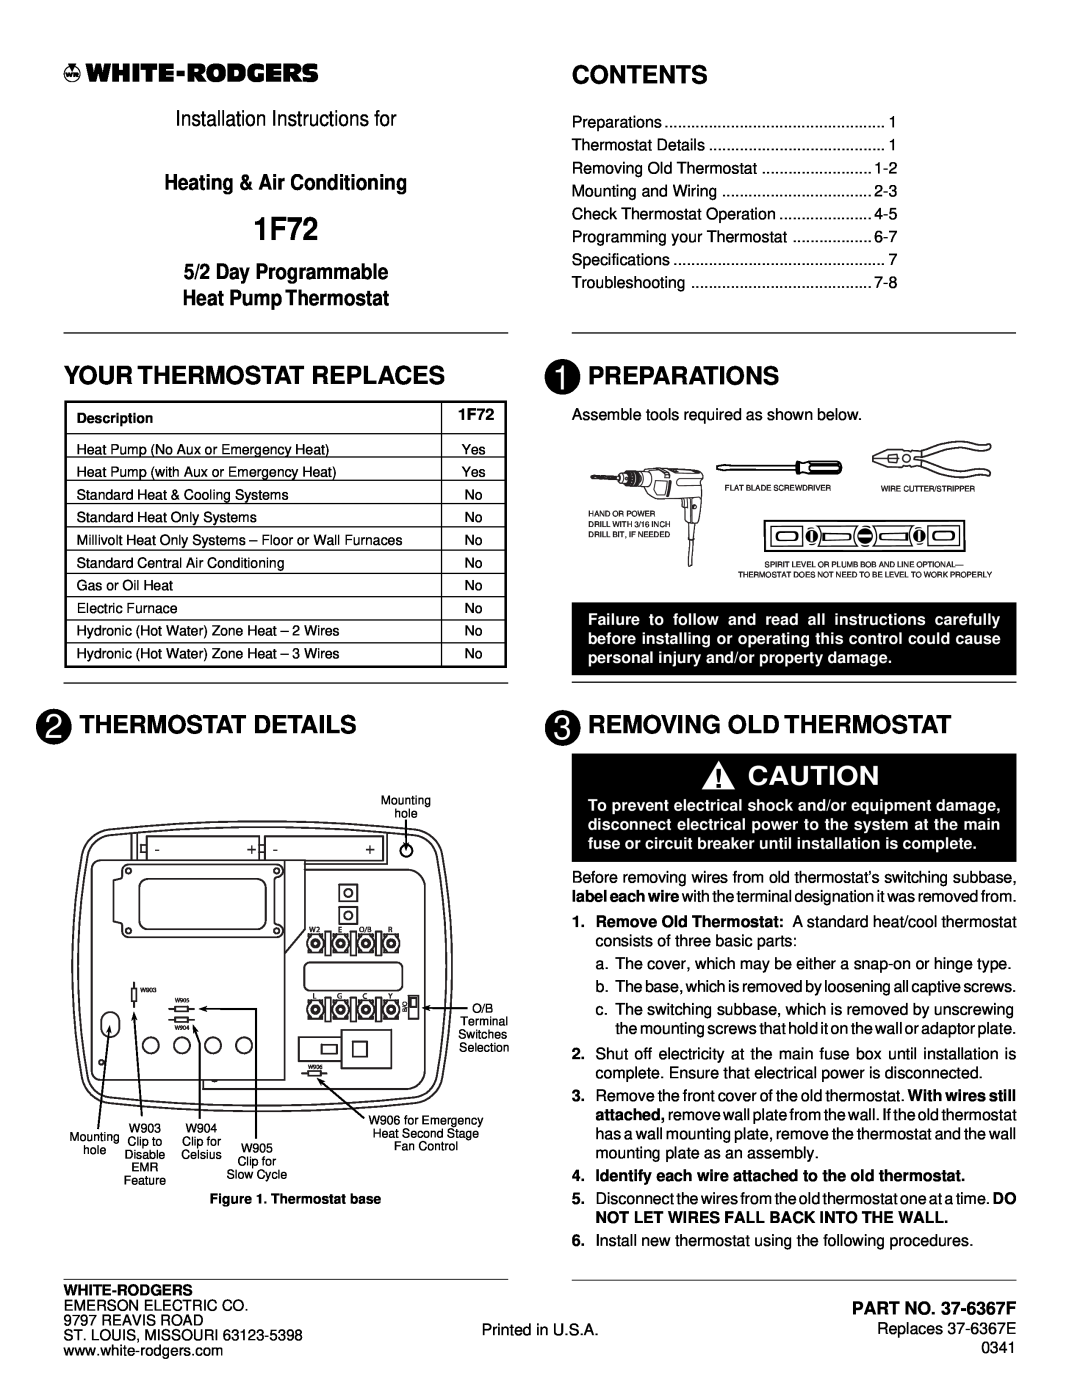 White Rodgers 1F72 installation instructions Contents, Your Thermostat Replaces, Preparations, Thermostat Details 